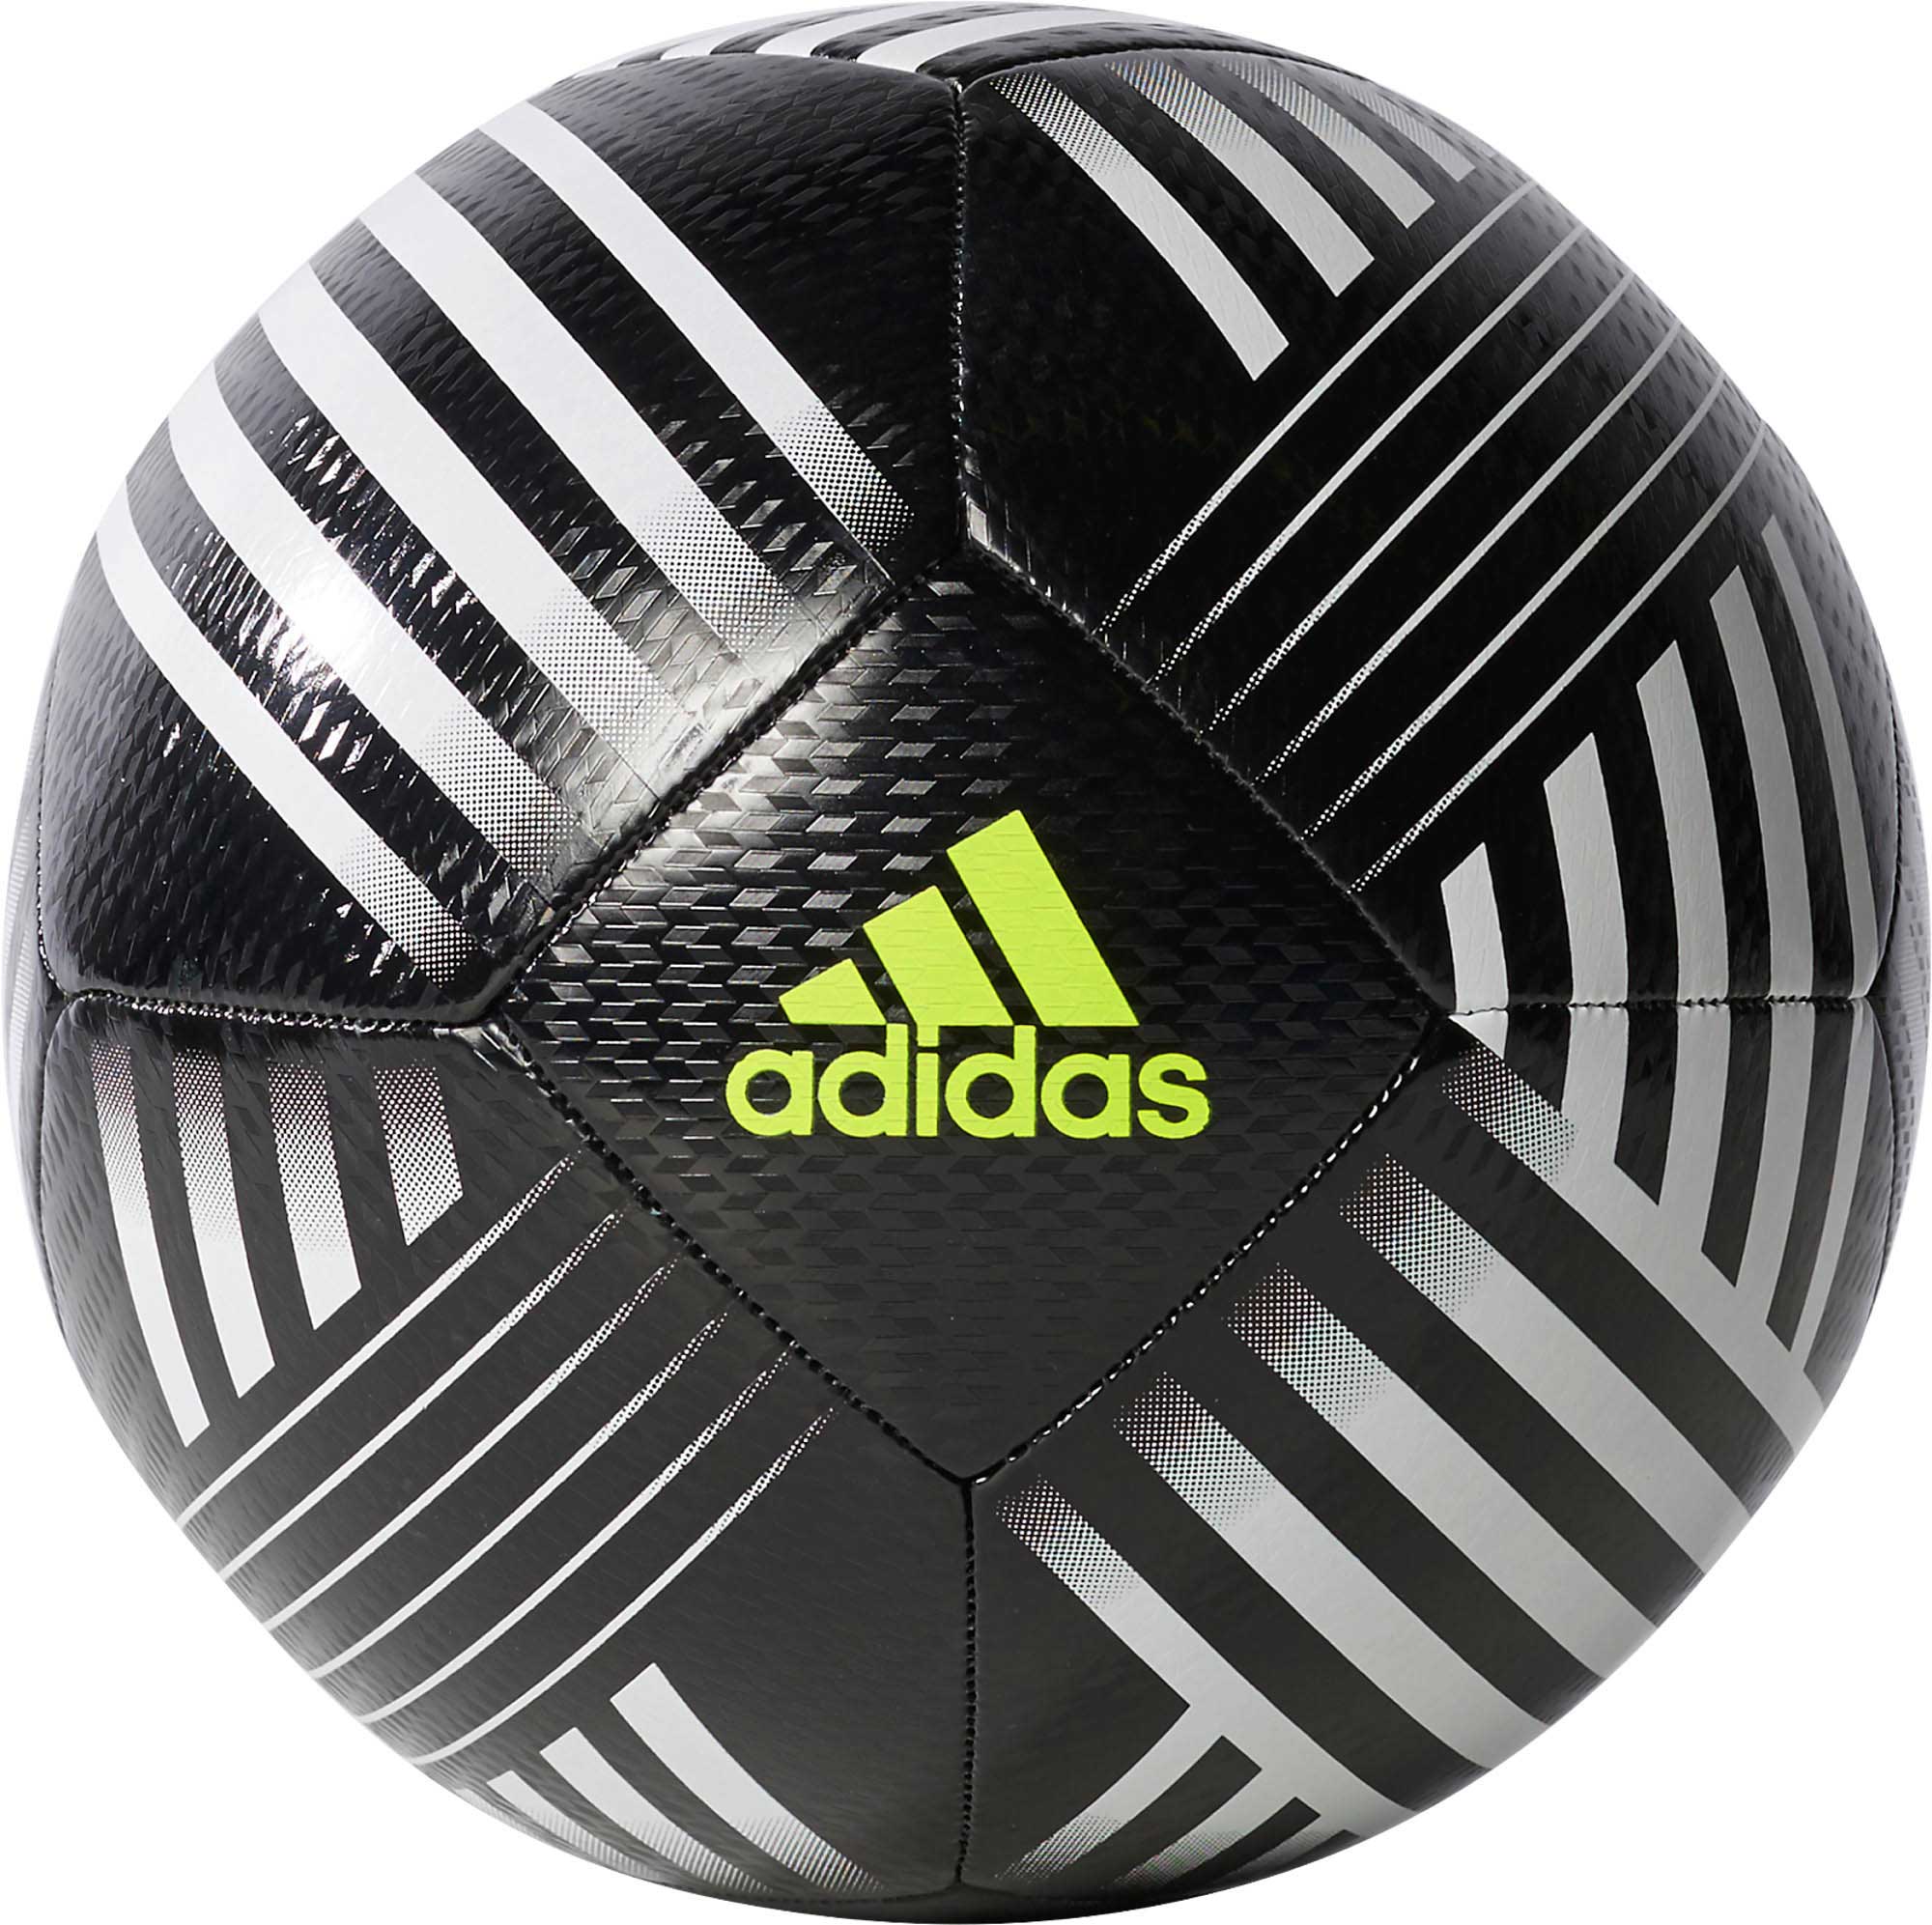 adidas black and white soccer ball